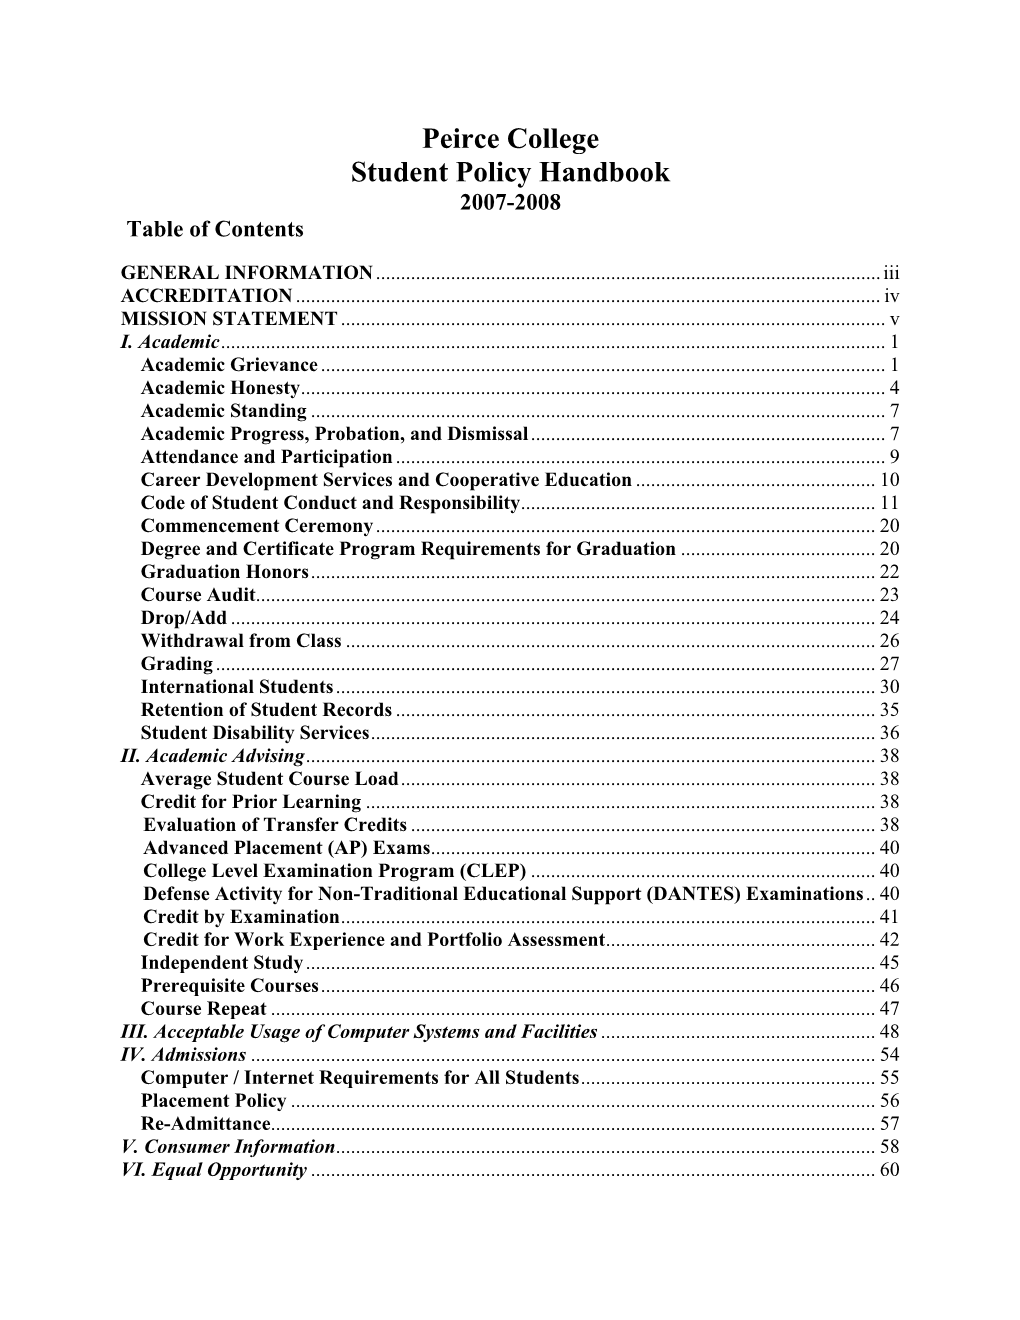 Peirce College Student Policy Handbook 2007-2008 Table of Contents